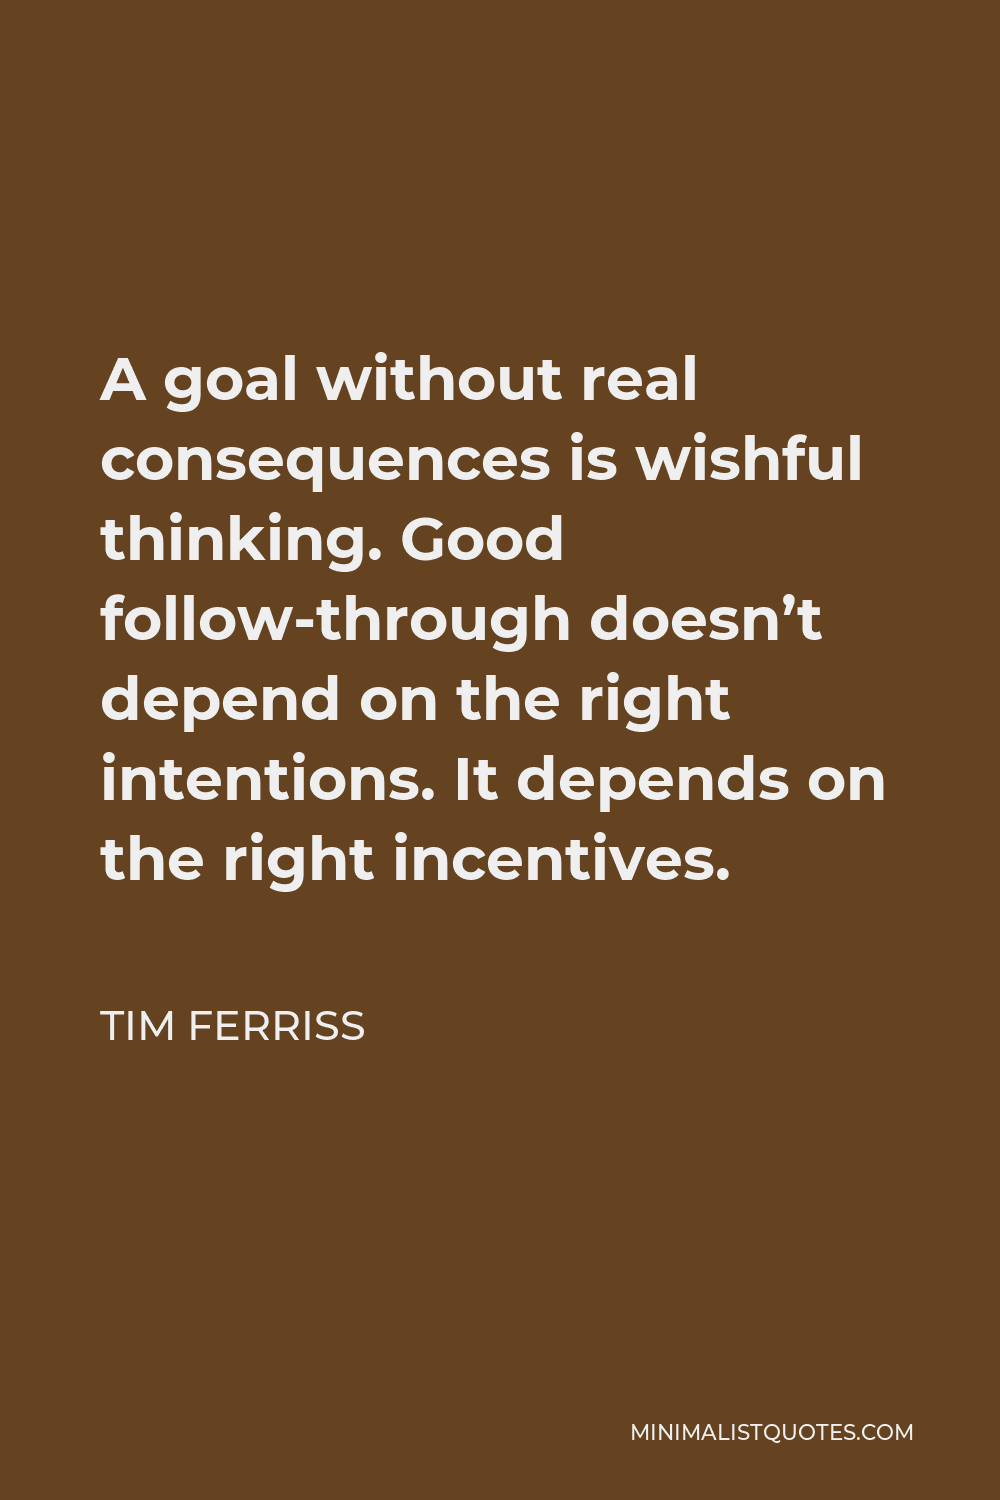 Tim Ferriss Quote - A goal without real consequences is wishful thinking. Good follow-through doesn’t depend on the right intentions. It depends on the right incentives.